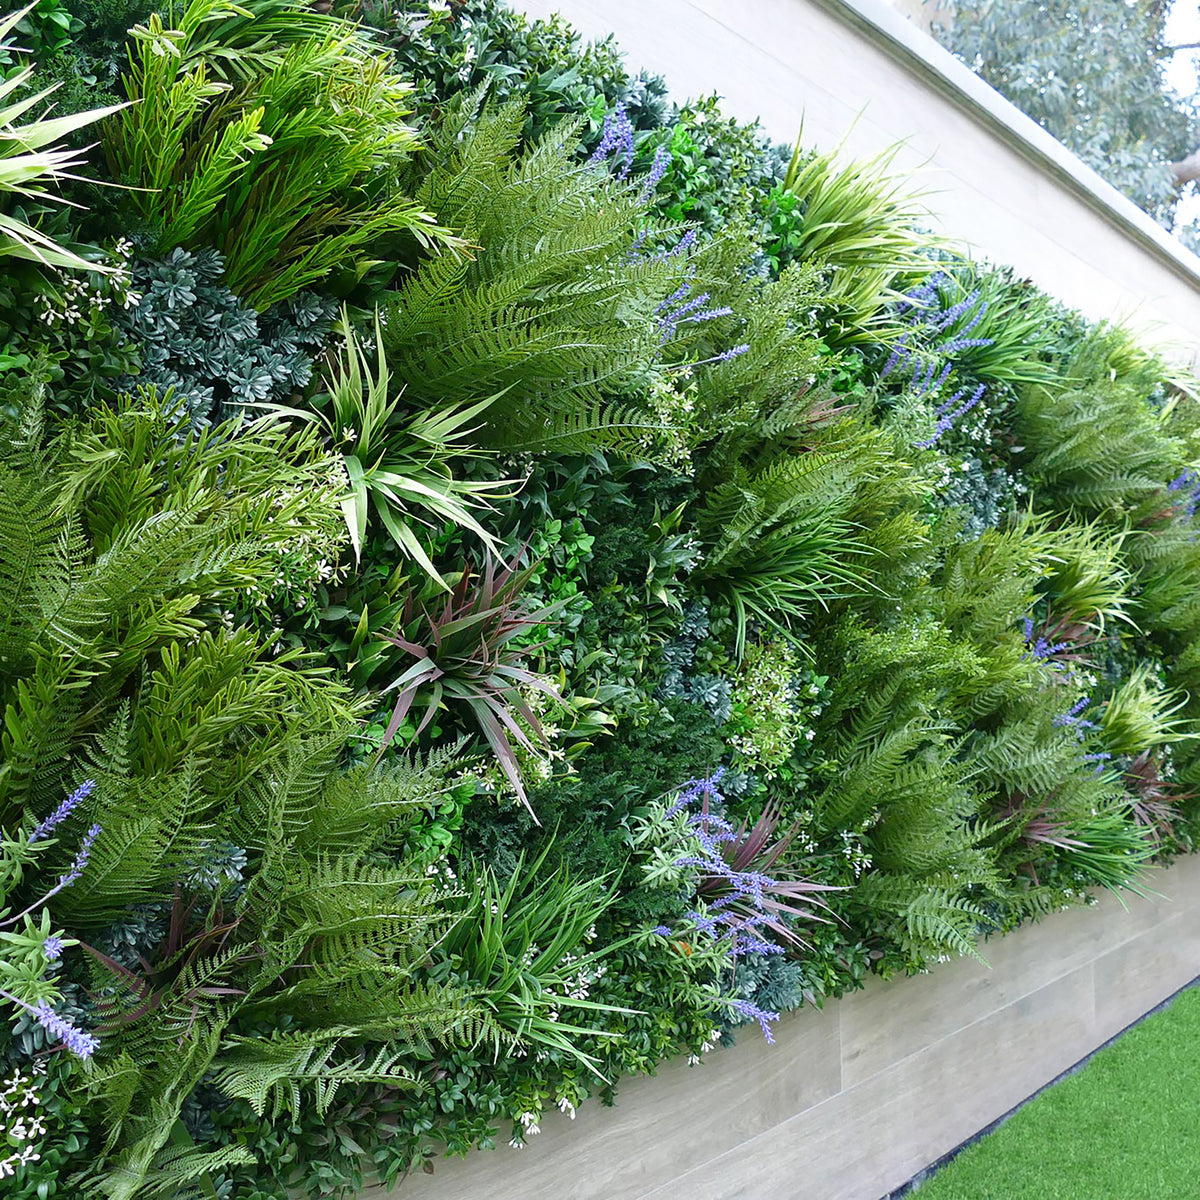 Artificial Green Wall System, Complete Kit by VistaFolia®